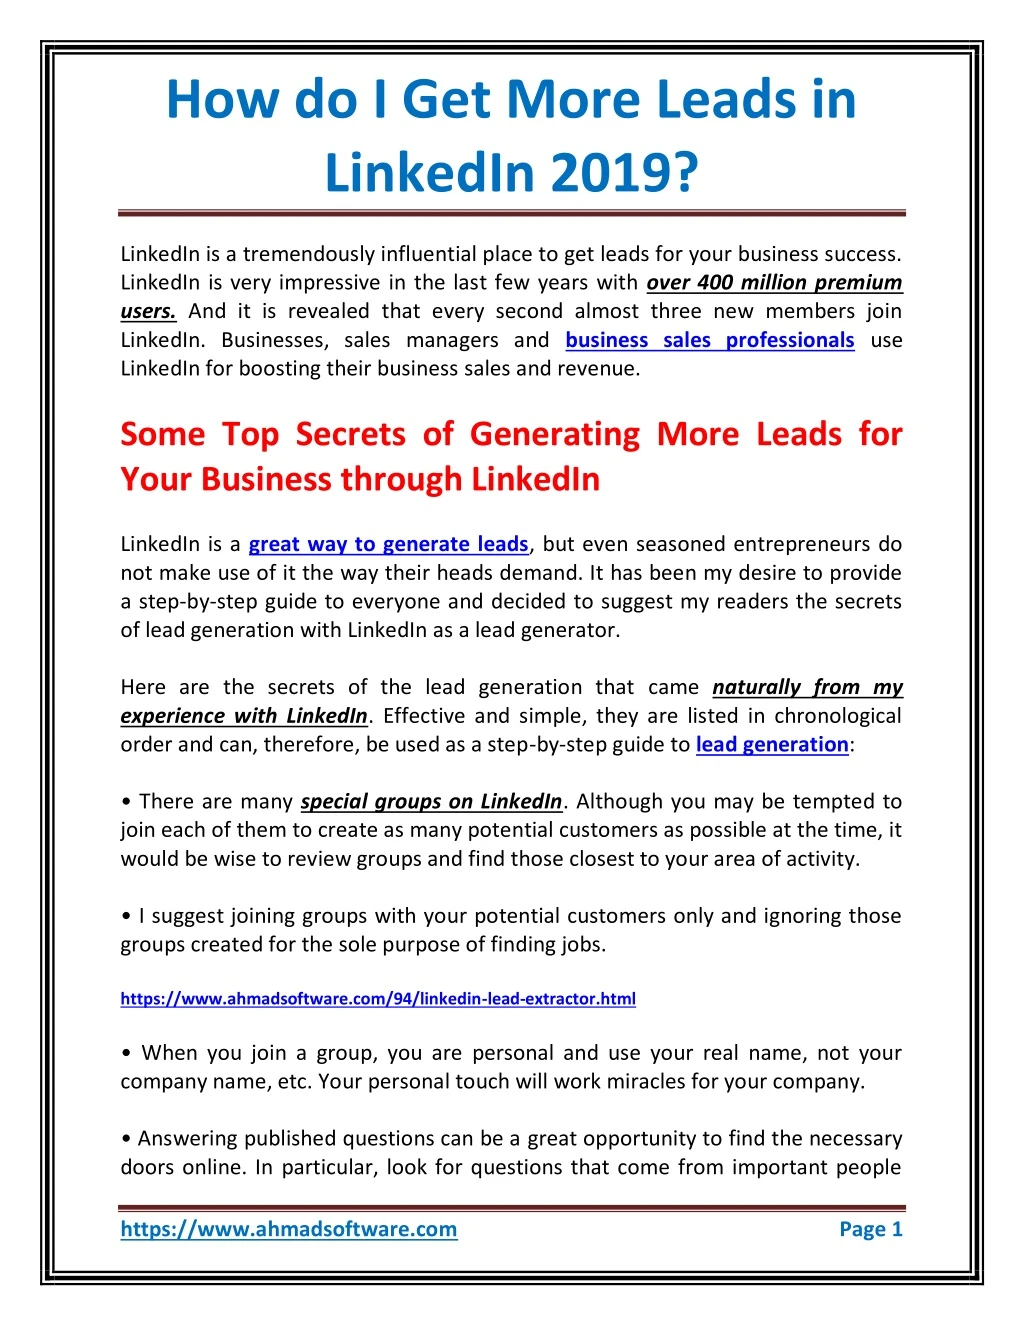 how do i get more leads in linkedin 2019